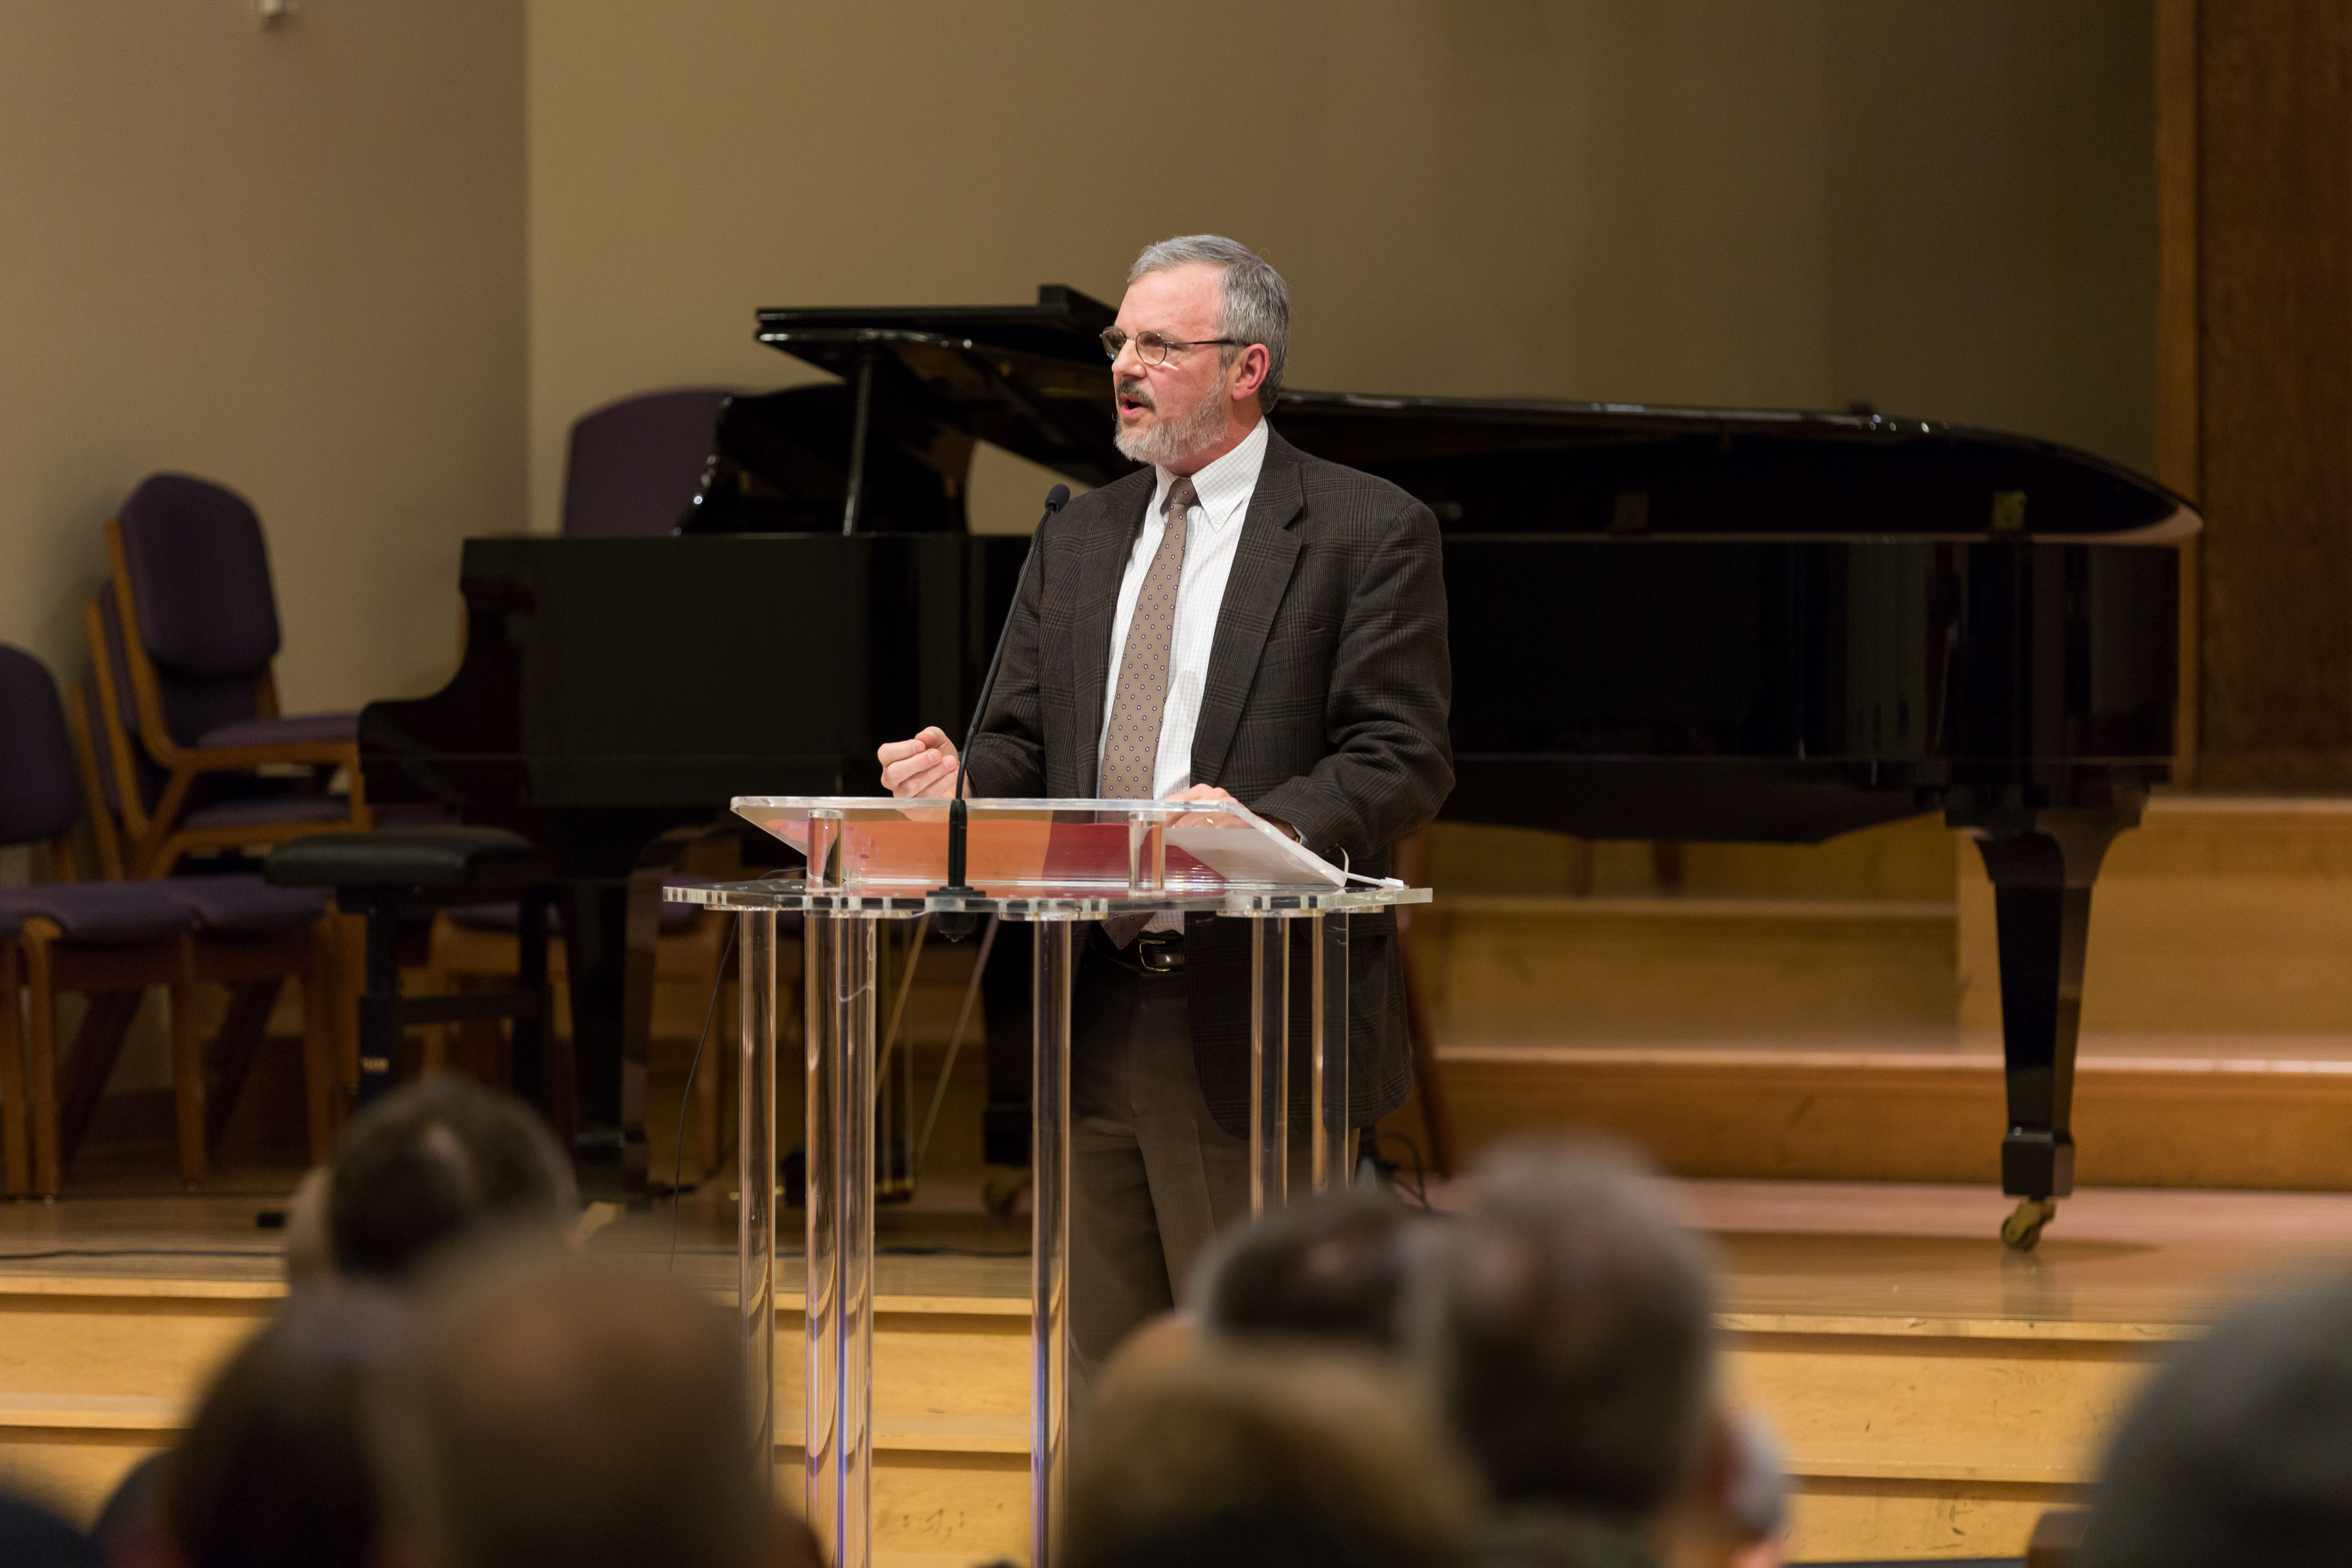 Kevin J. Vanhoozer, research professor of systematic theology at Trinity Evangelical Theological Seminary in Deerfield, Illinois, was the symposium’s keynote speaker, photo credit: Shiekainah Decano